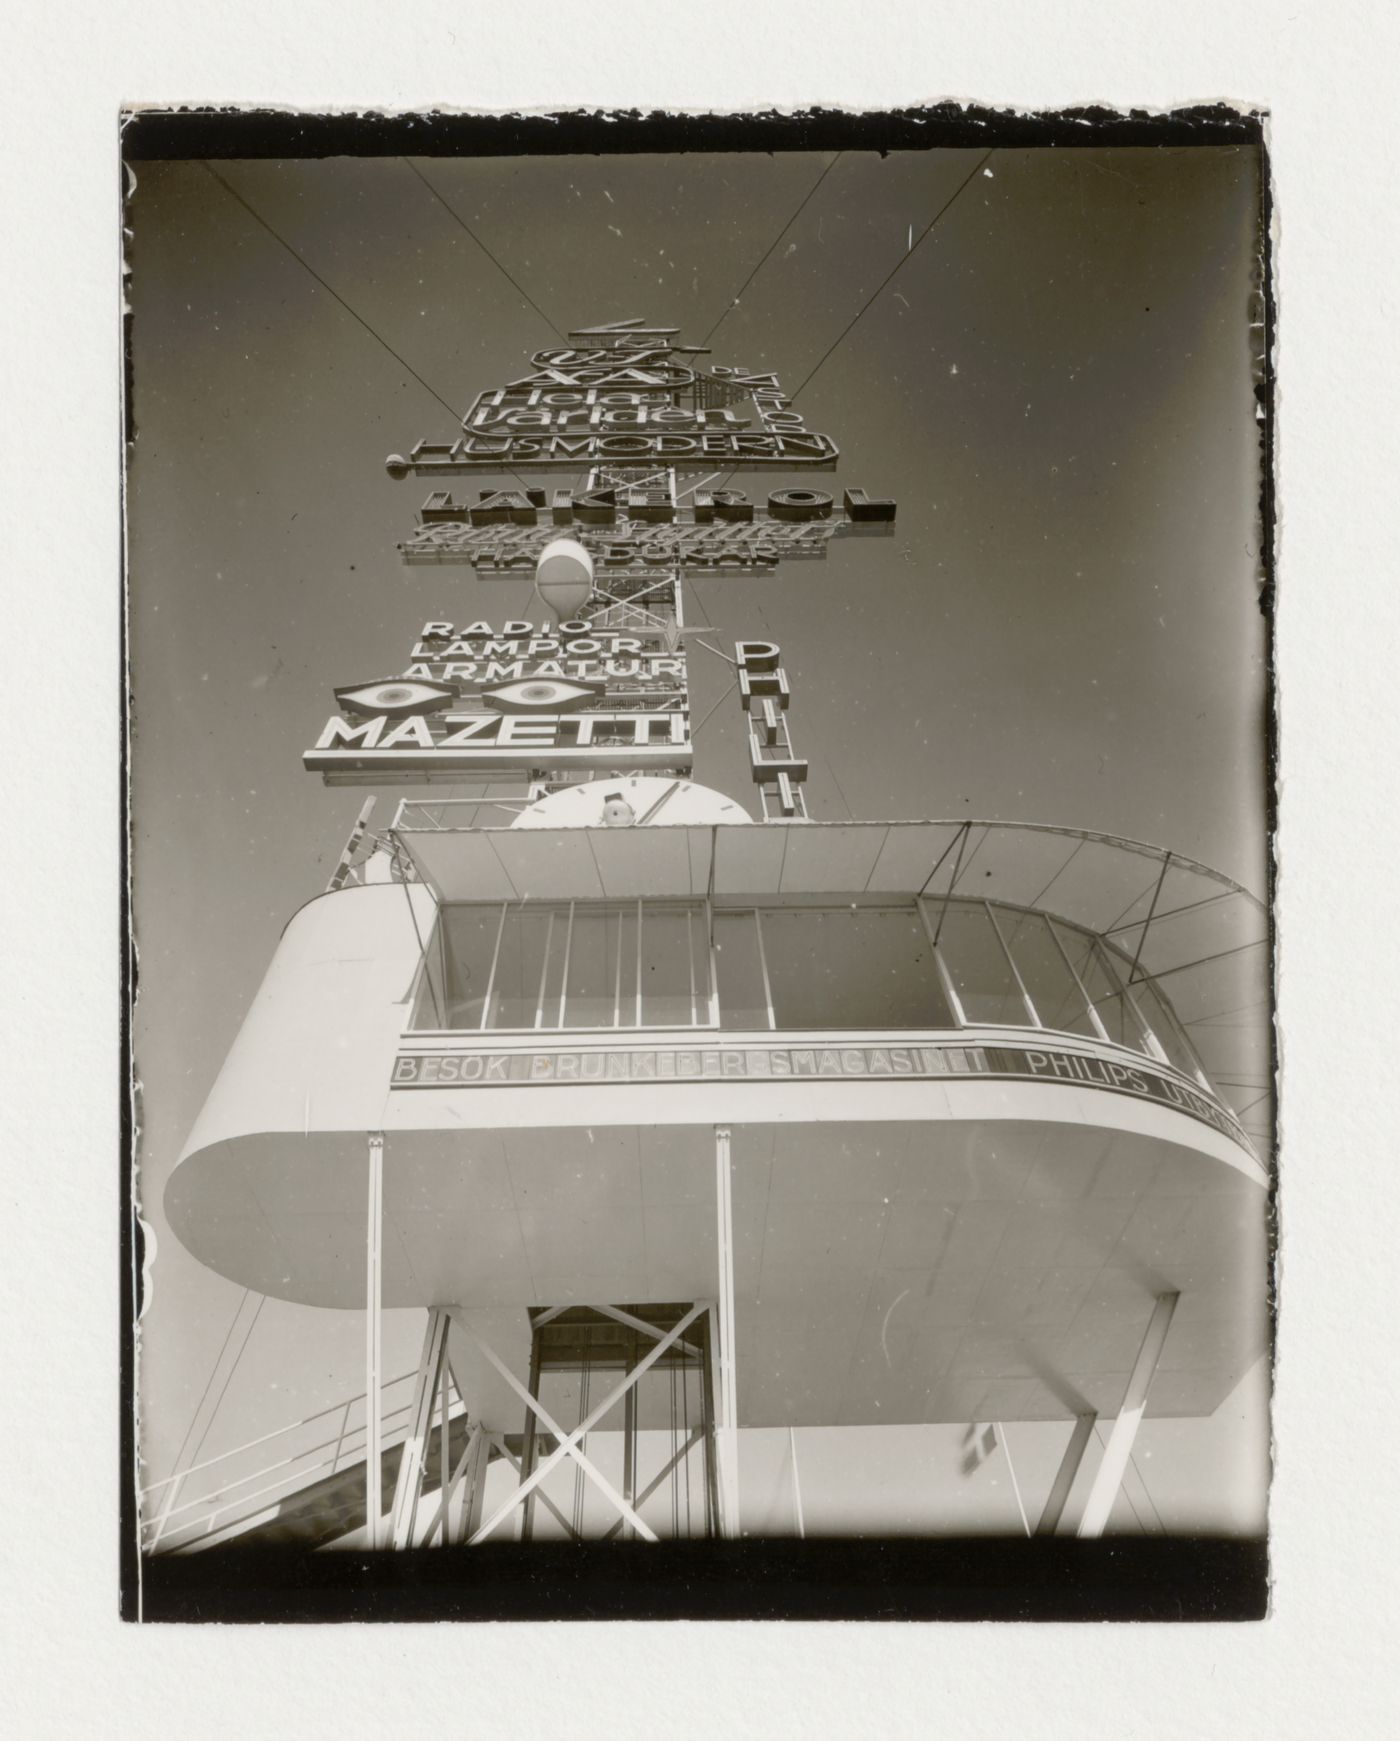 Worm's-eye view of the base of the advertising mast at the Stockholm Exhibition of 1930 showing a clock and neon lettering designed by Sigurd Lewerentz, Stockholm